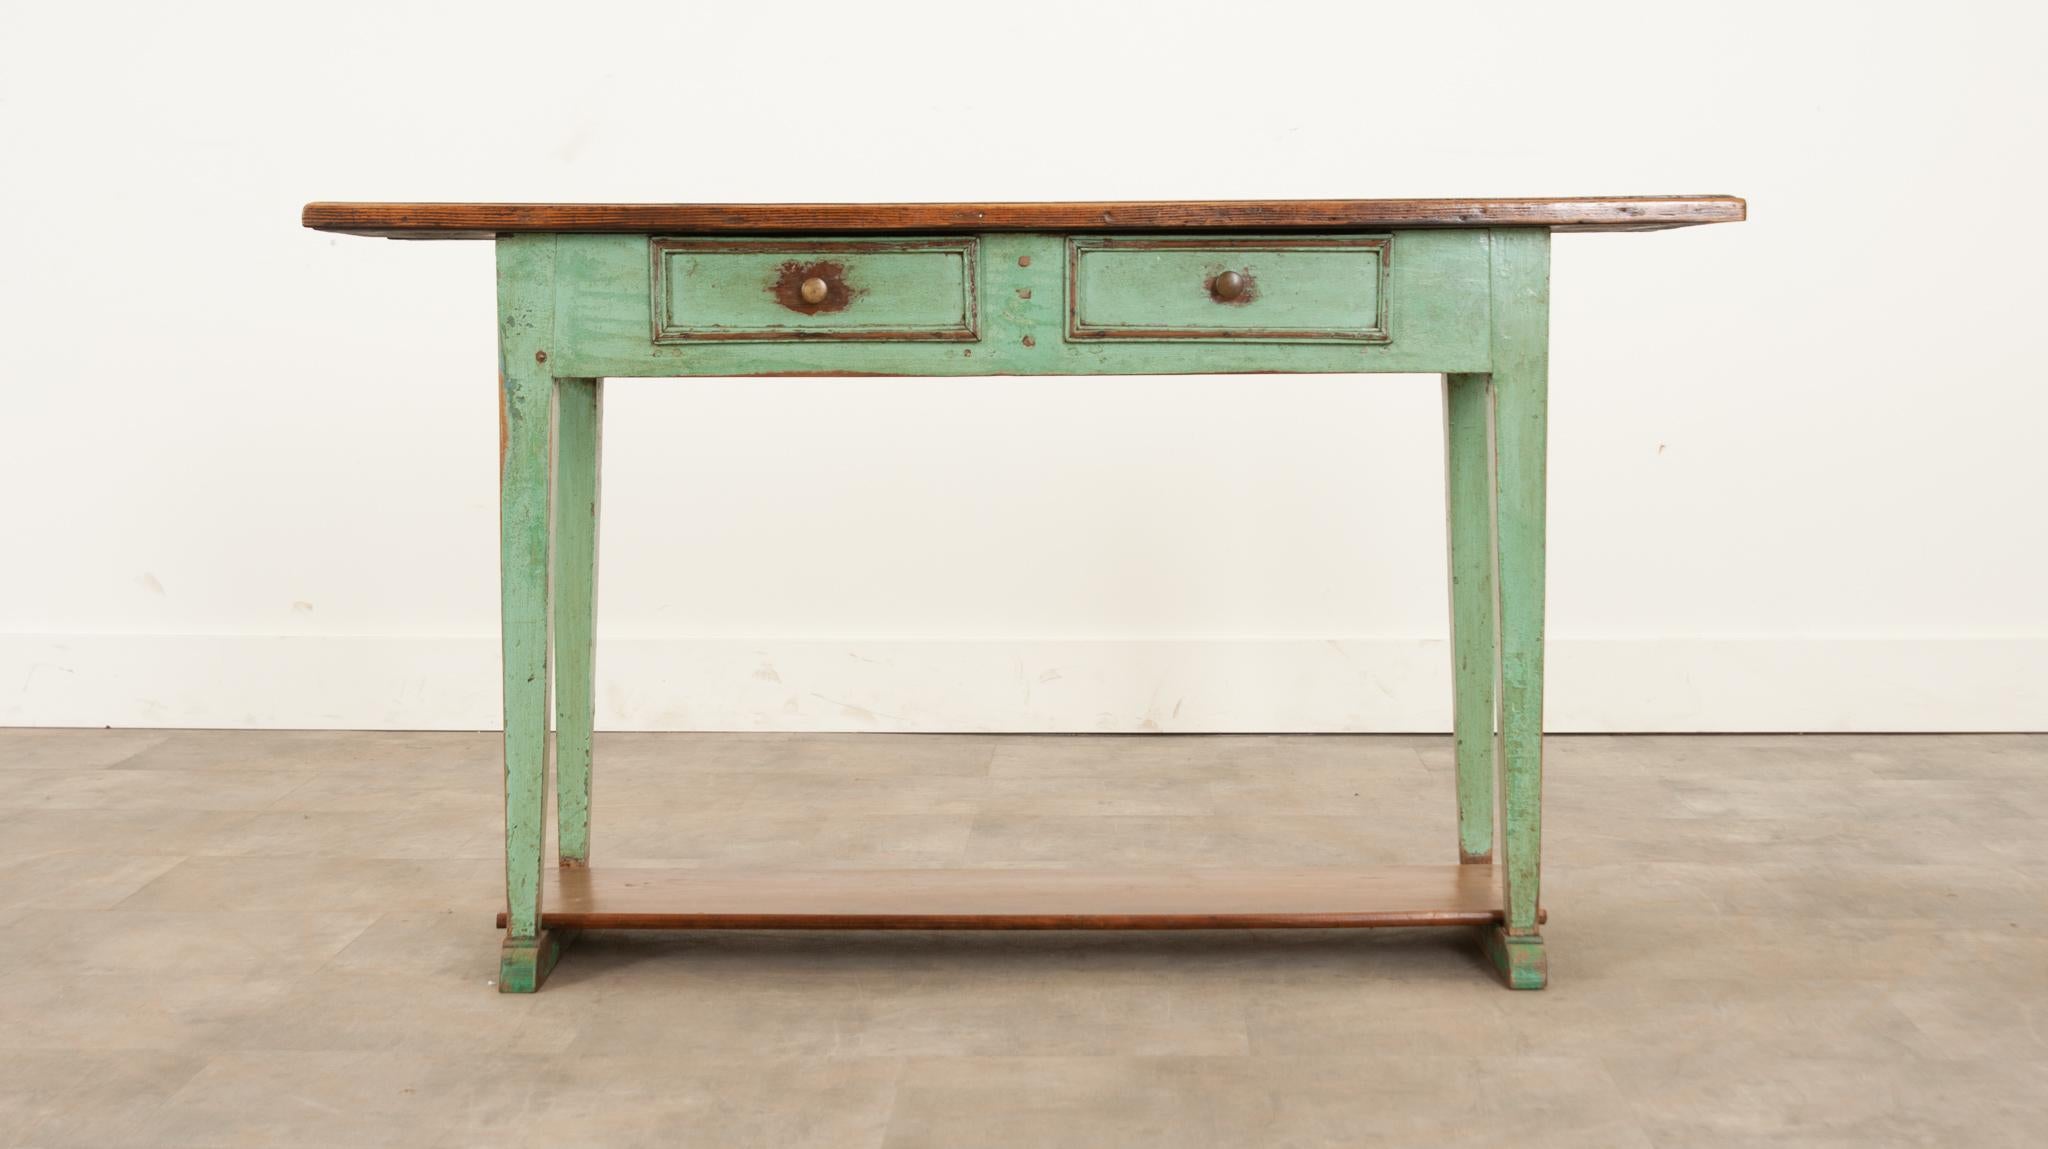 This 19th century English server is the perfect way to add a provincial pop of color to any space. The pine top showcases a beautiful patina and visible peg-in-hole joinery. Brightly painted in a sea foam green, the apron and legs have aged in just